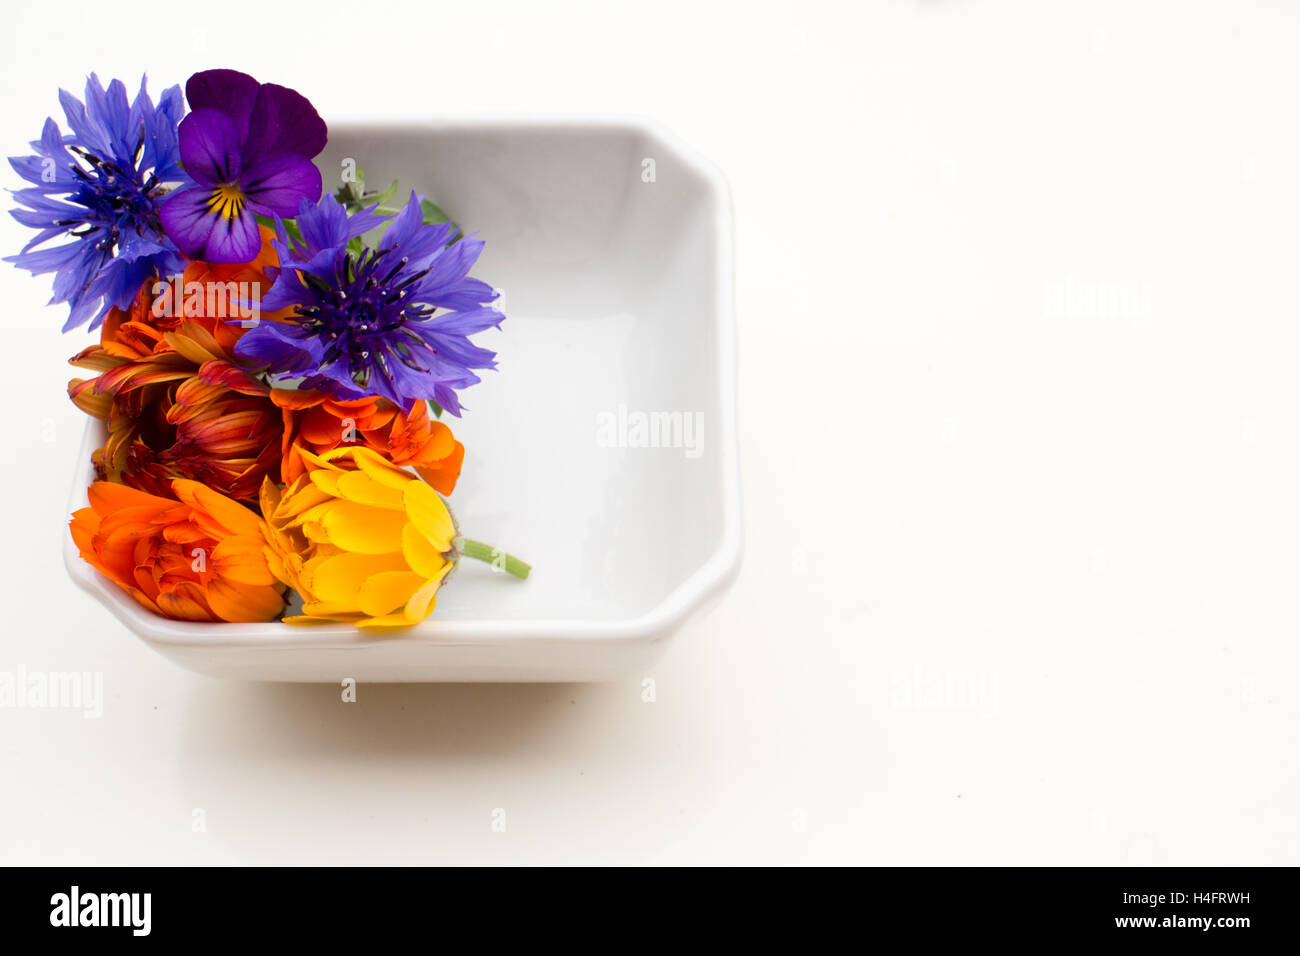 Edible flowers in a container, bachelor buttons, pansy, calendulas, purple flowers, red flowers, blue flowers, farm inspired Stock Photo